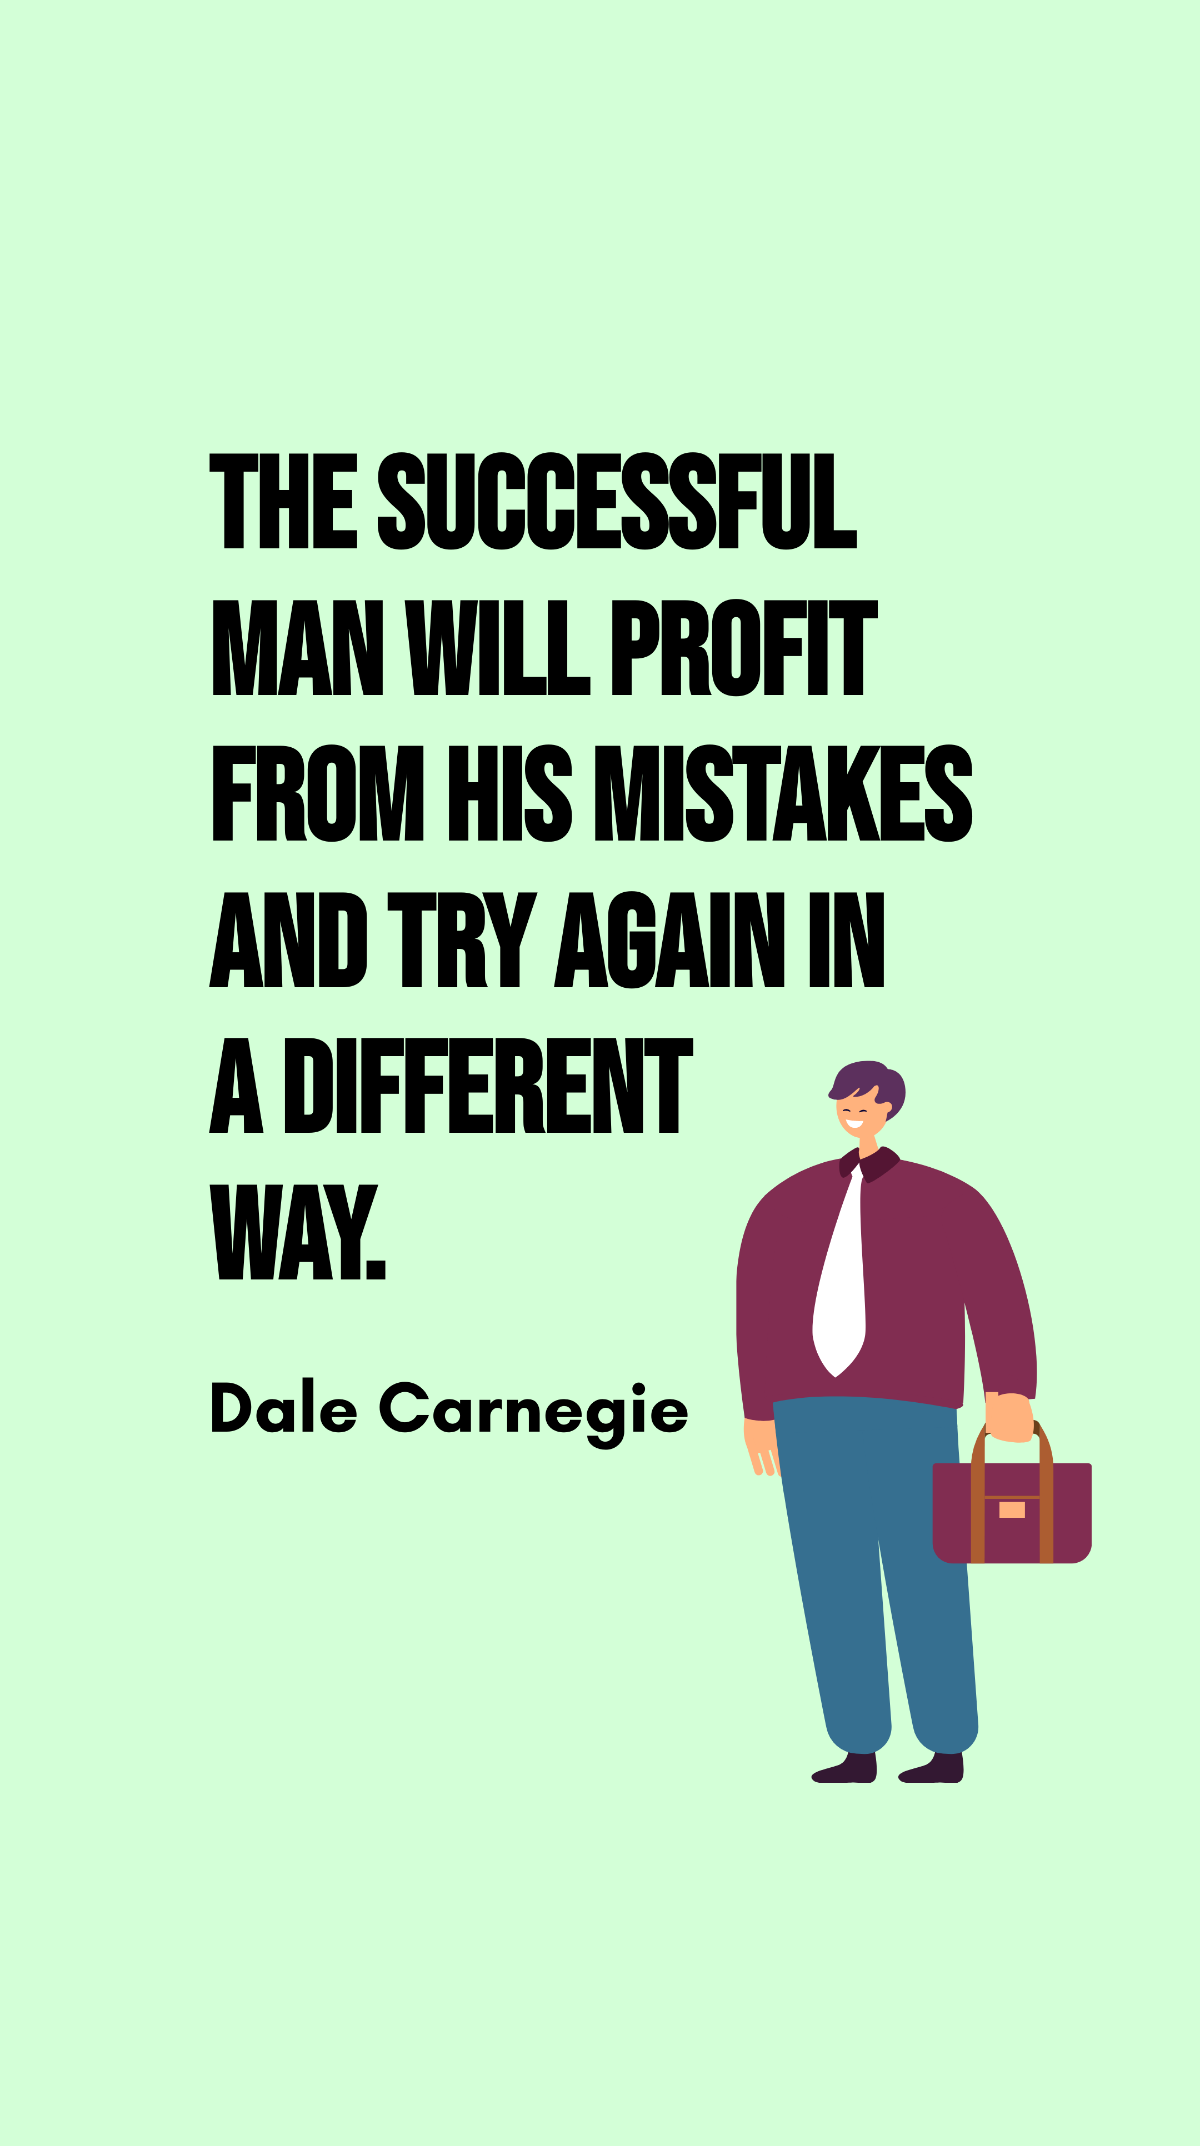 Free Dale Carnegie - The successful man will profit from his mistakes and try again in a different way. Template